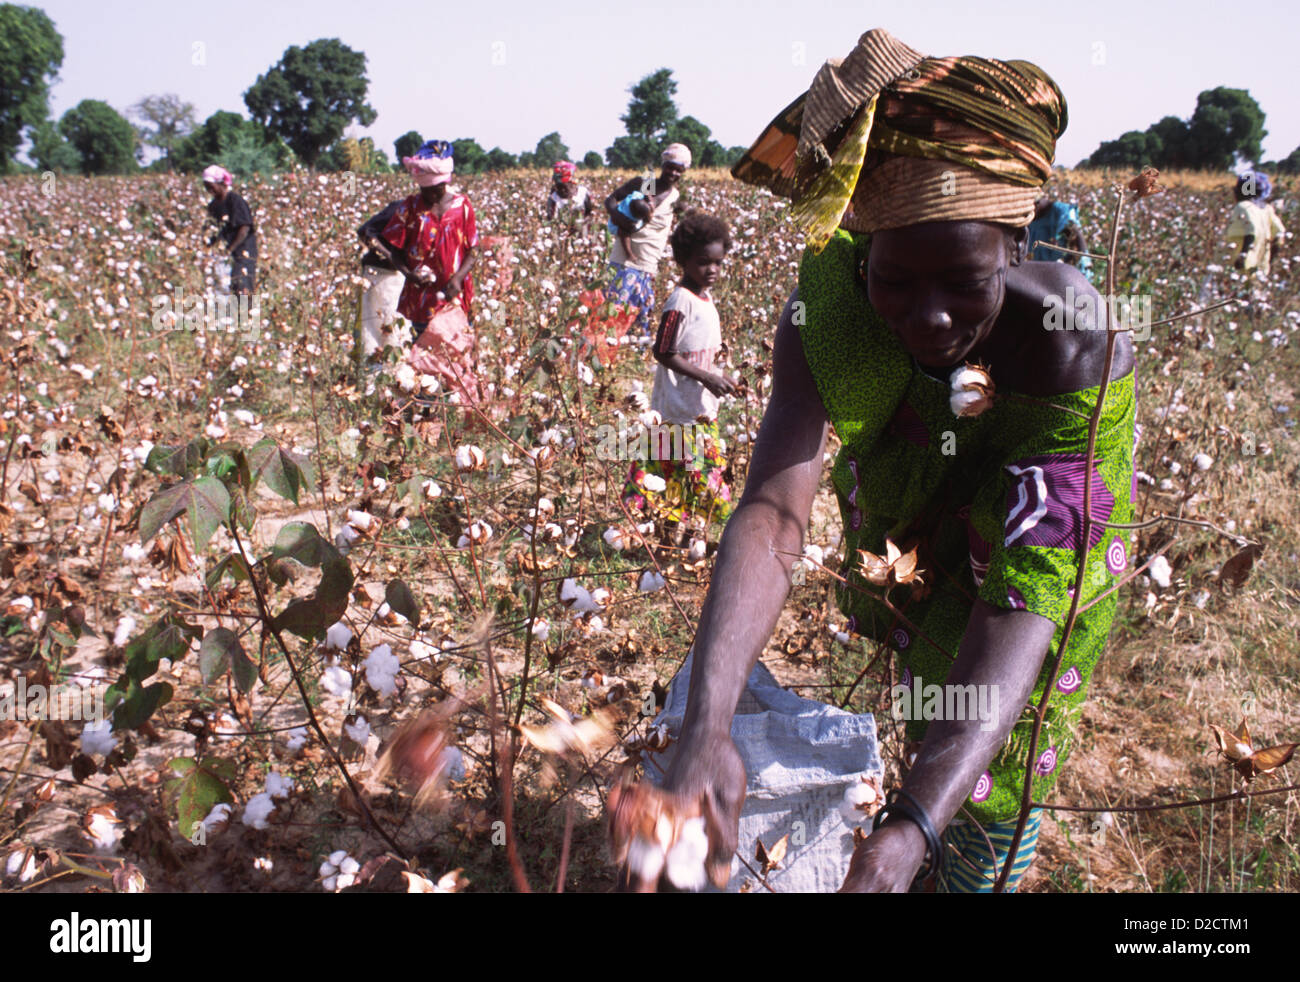 Harvesting cotton, the main export, in Mali, West Africa. Stock Photo